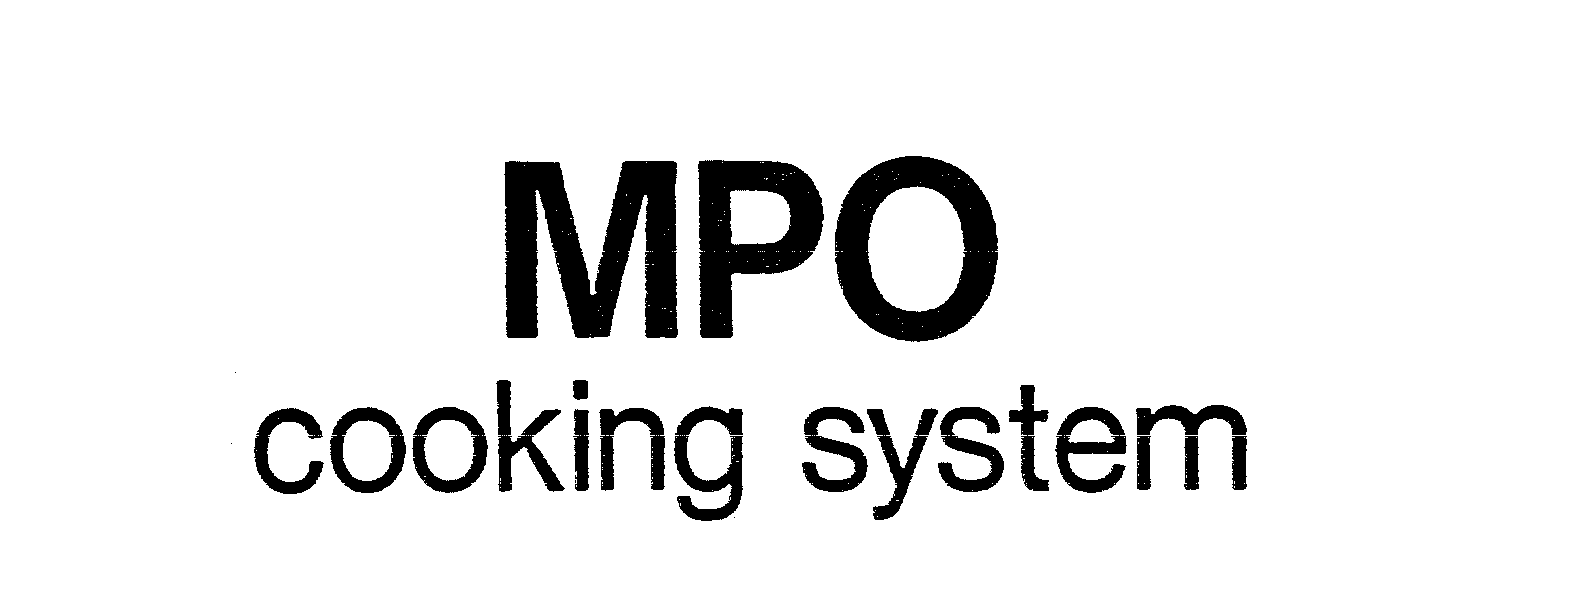  MPO COOKING SYSTEM